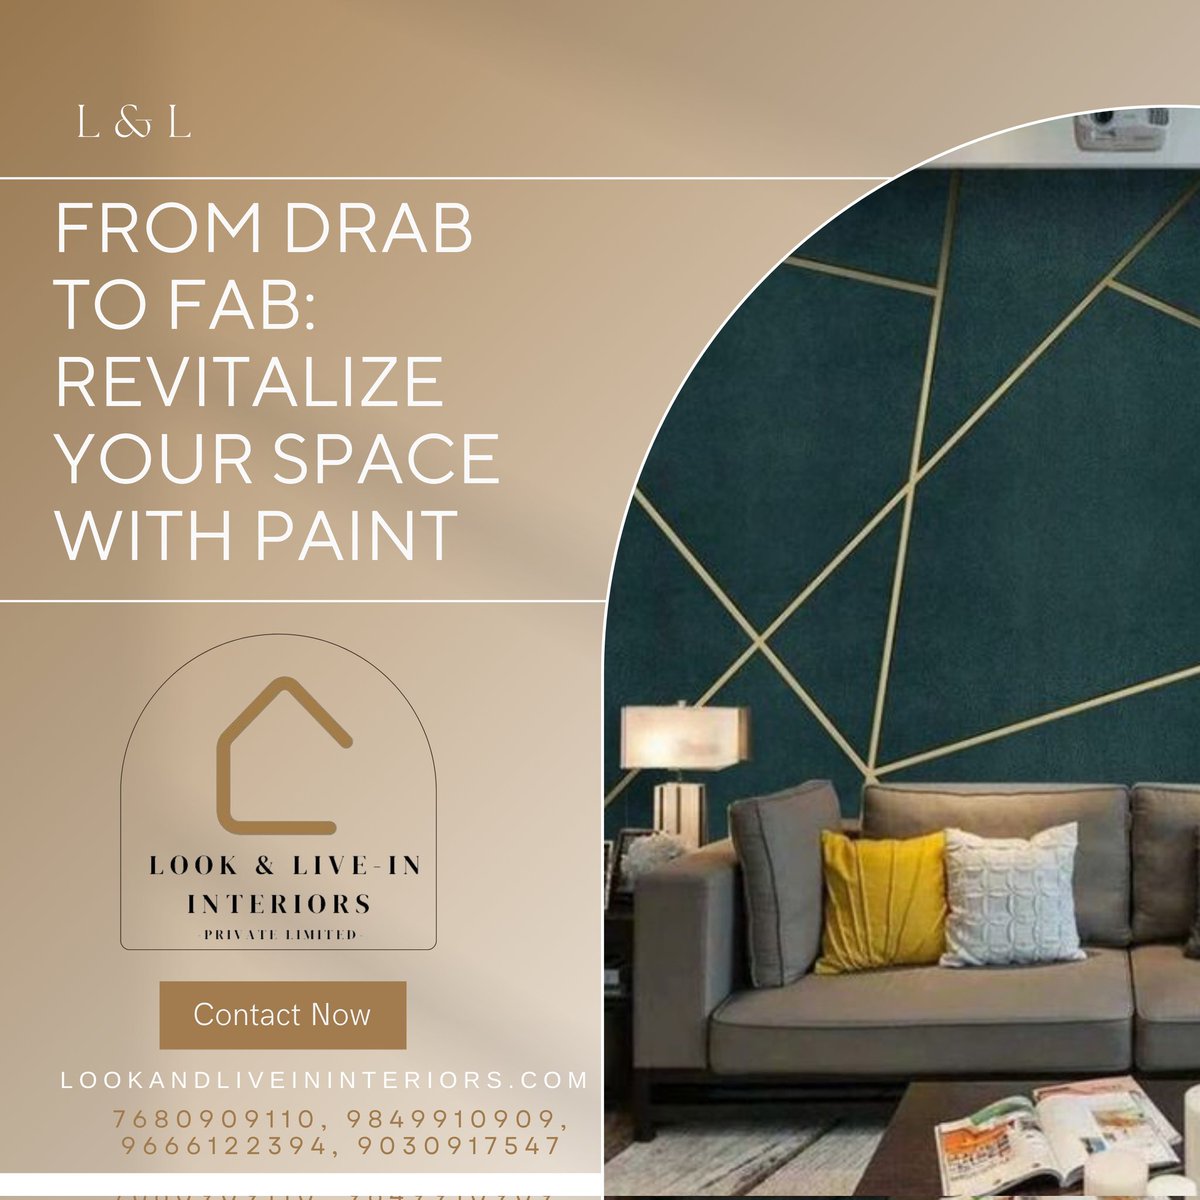 Say goodbye to dull walls and hello to a fresh new look #interiores #italiandesign #interiordesign #interiorstyling #interiorstyling #homeinterior #homeinteriors #homedecor #homedesign #hyderabadinteriorsdesigners #interiordesignershyderabad #trendinginterior #trendinginteriors